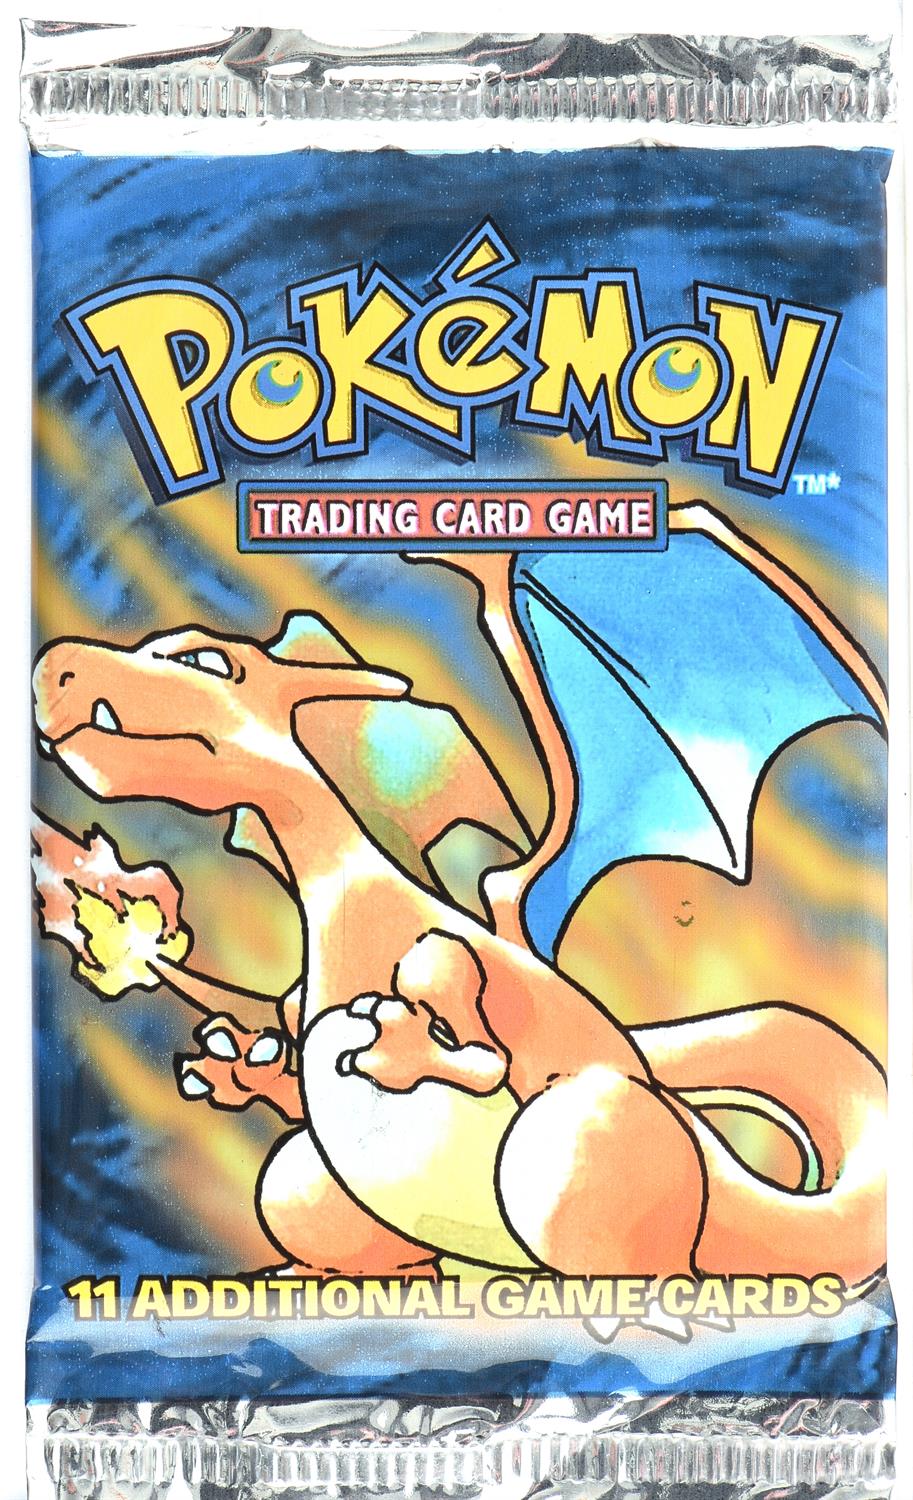 Pokemon TCG. Pokemon Base Set Sealed Booster Pack - Charizard Artwork, 21.2g. This item is from the